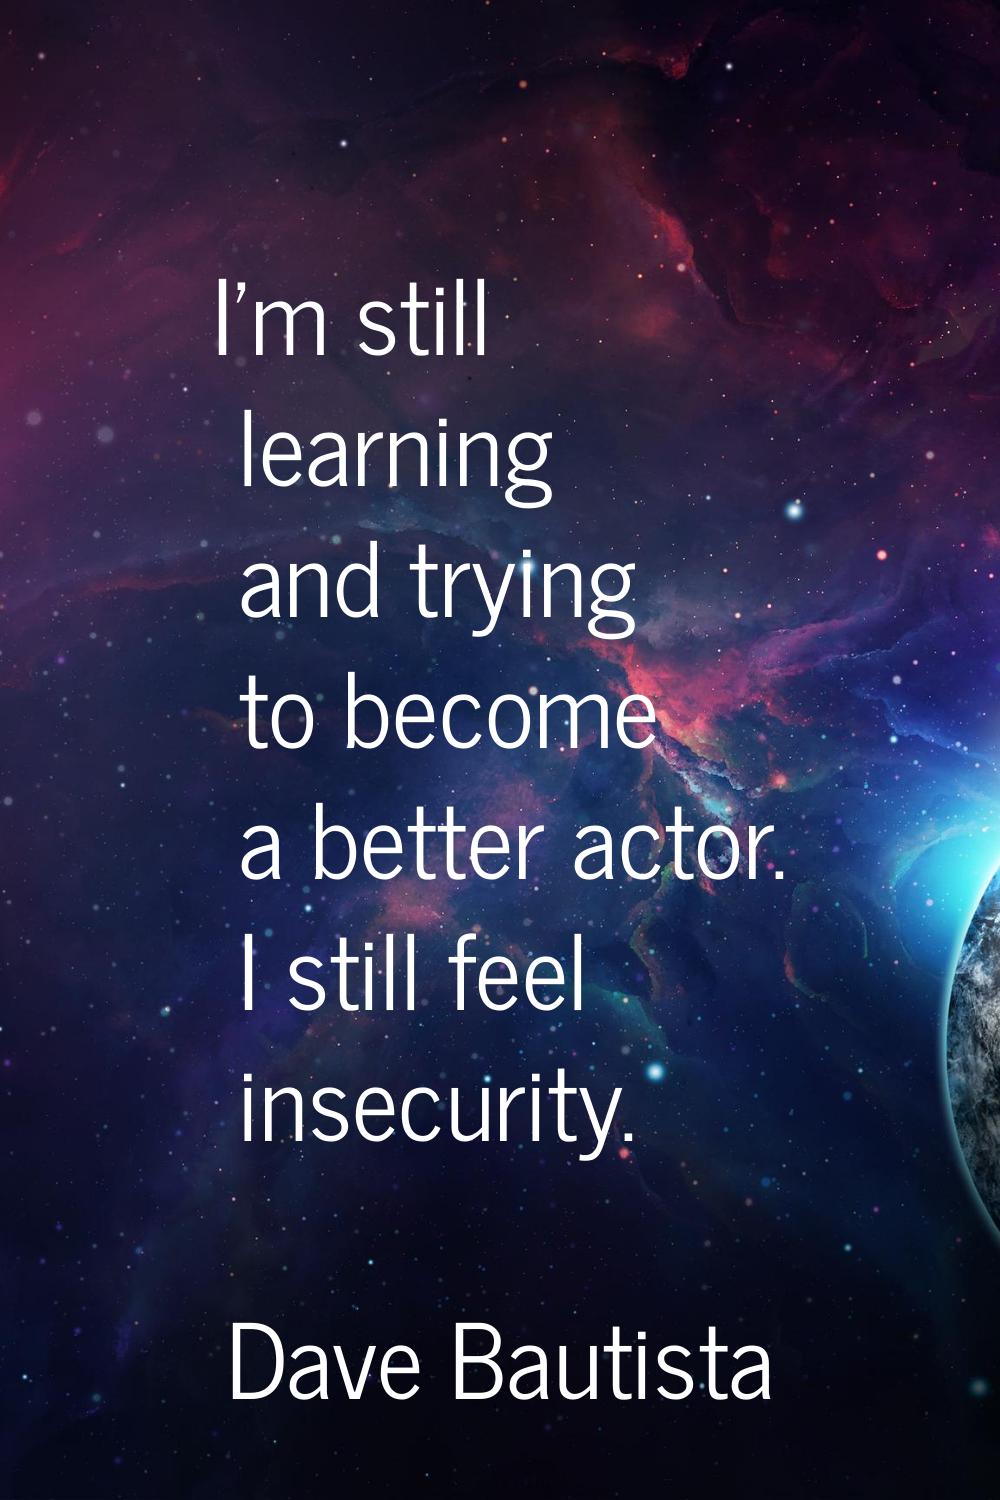 I'm still learning and trying to become a better actor. I still feel insecurity.